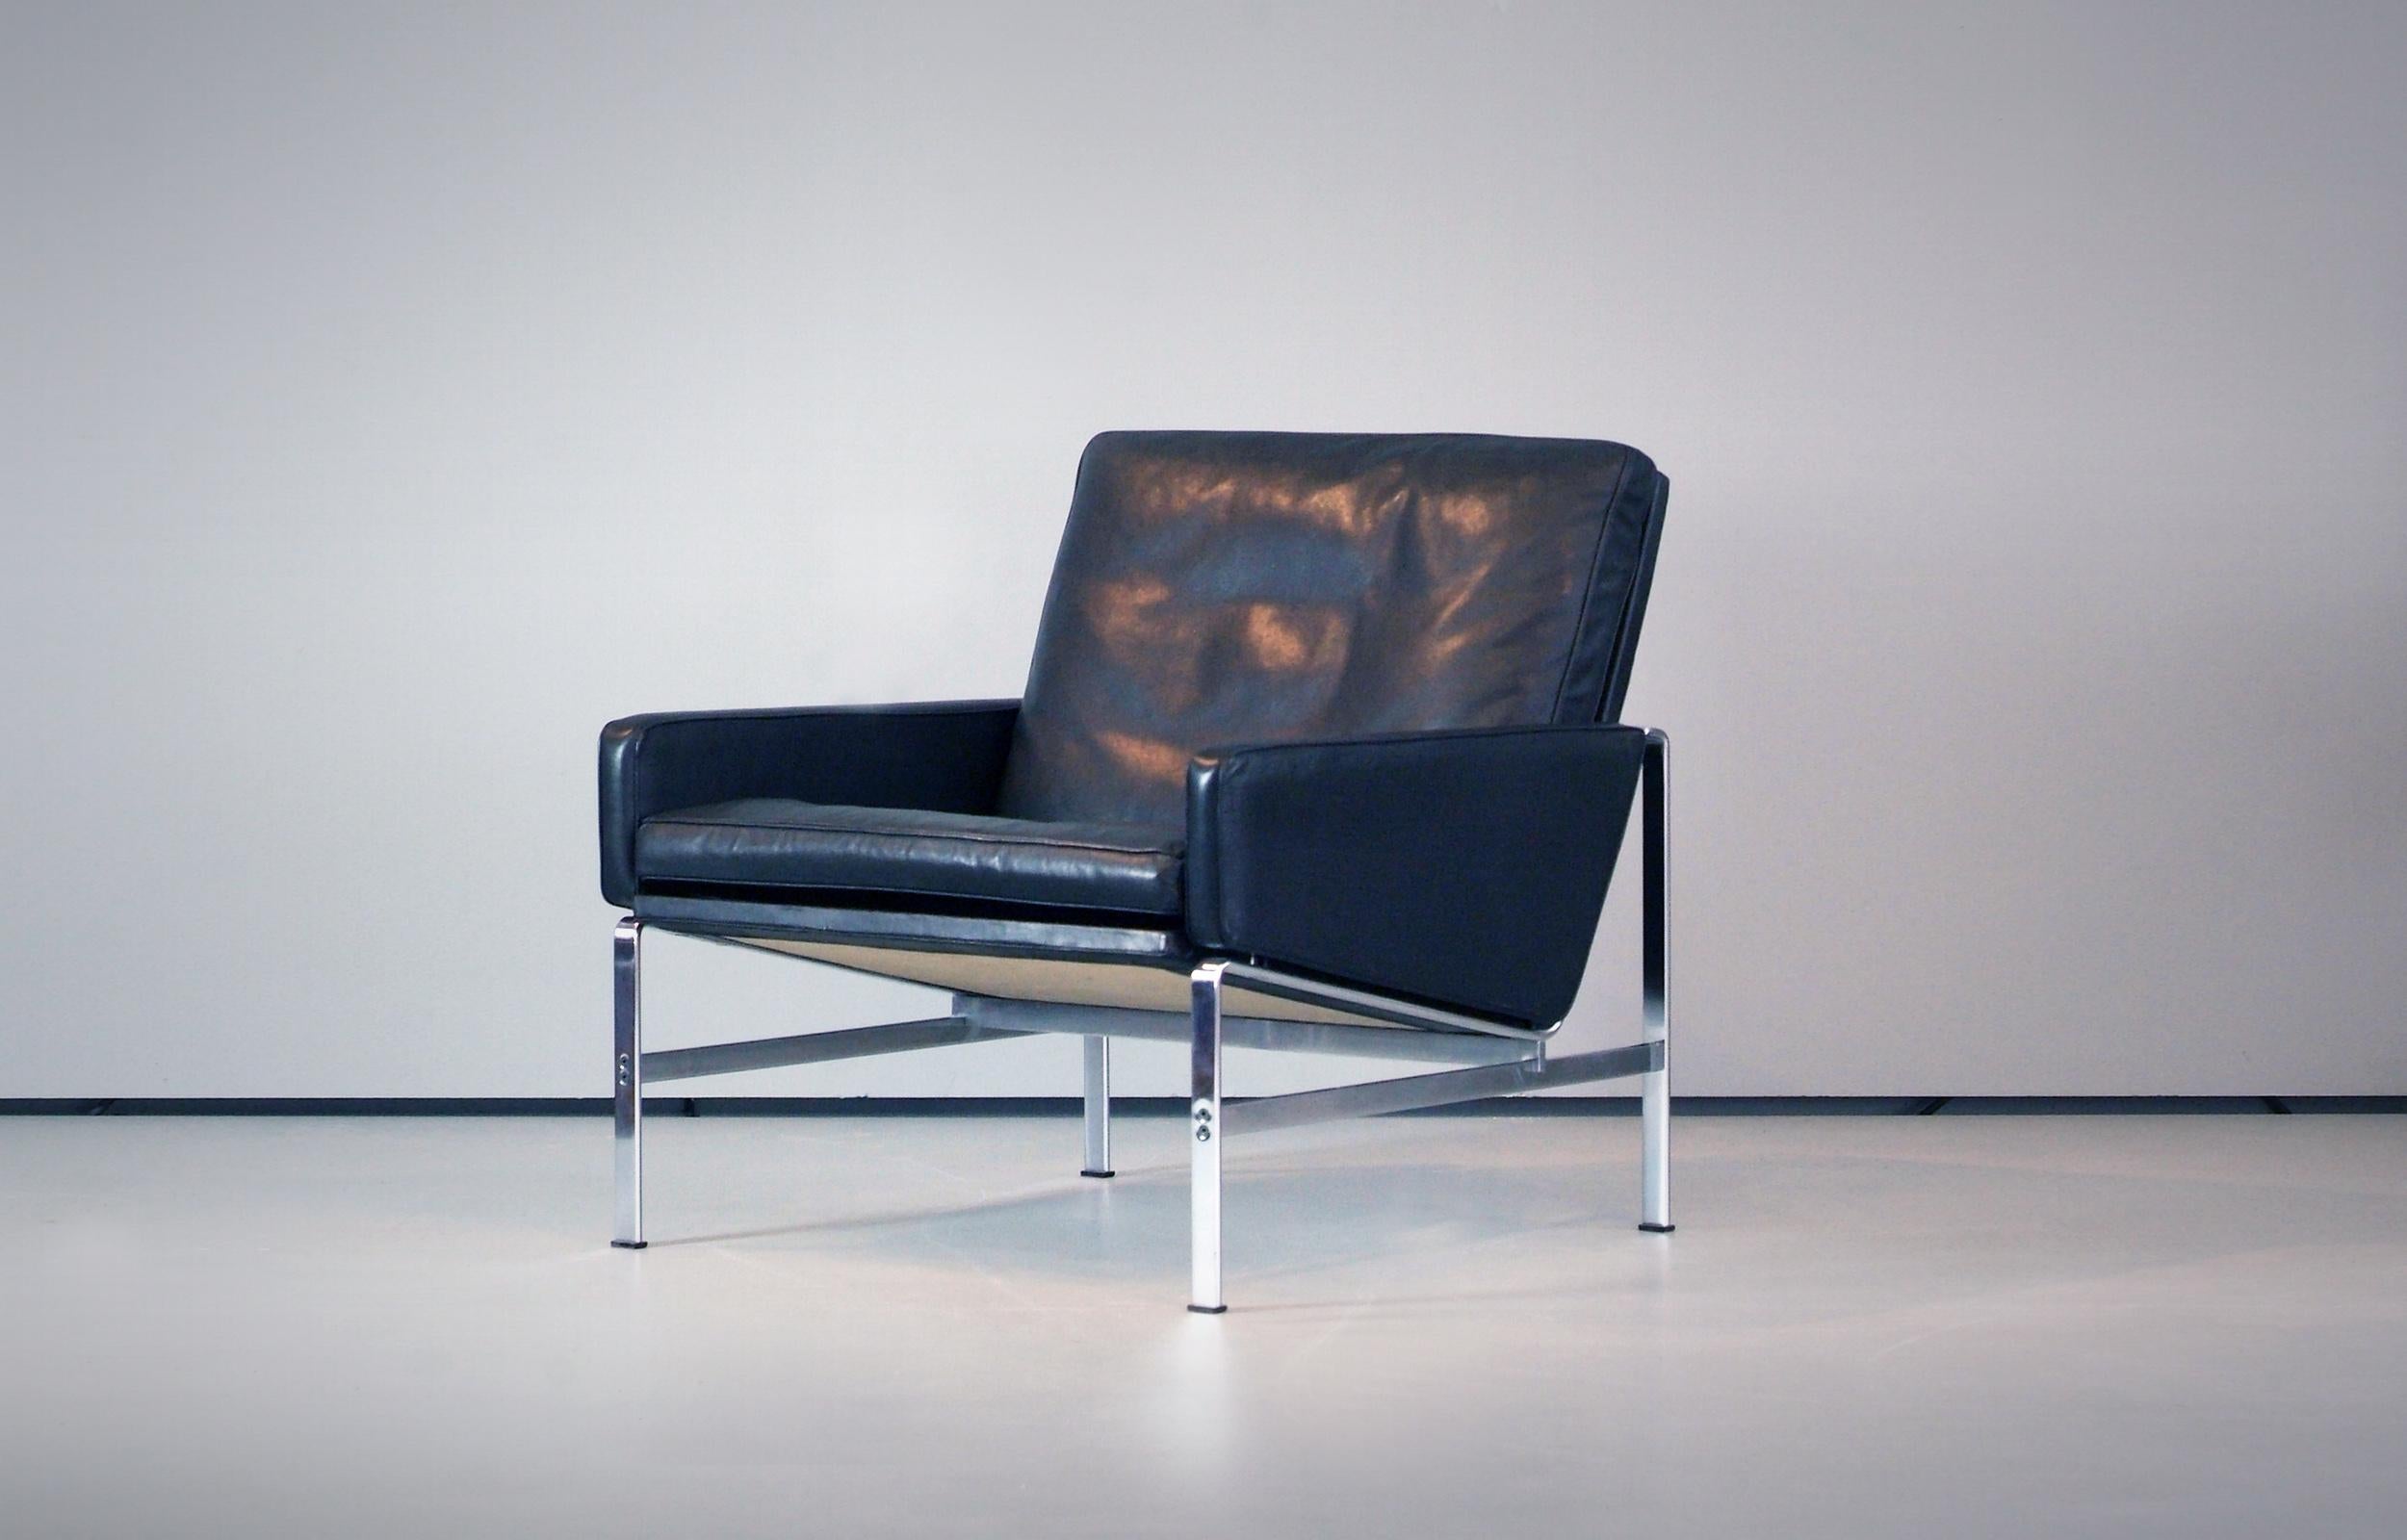 Rare Preben Fabricius & Jørgen Kastholm easy chair Mod. 6720 produced by Kill International in the 1960s - labeled. This model is out of production since the early 1980s. Original black leather and matte chromed steel. 

Perfect vintage condition